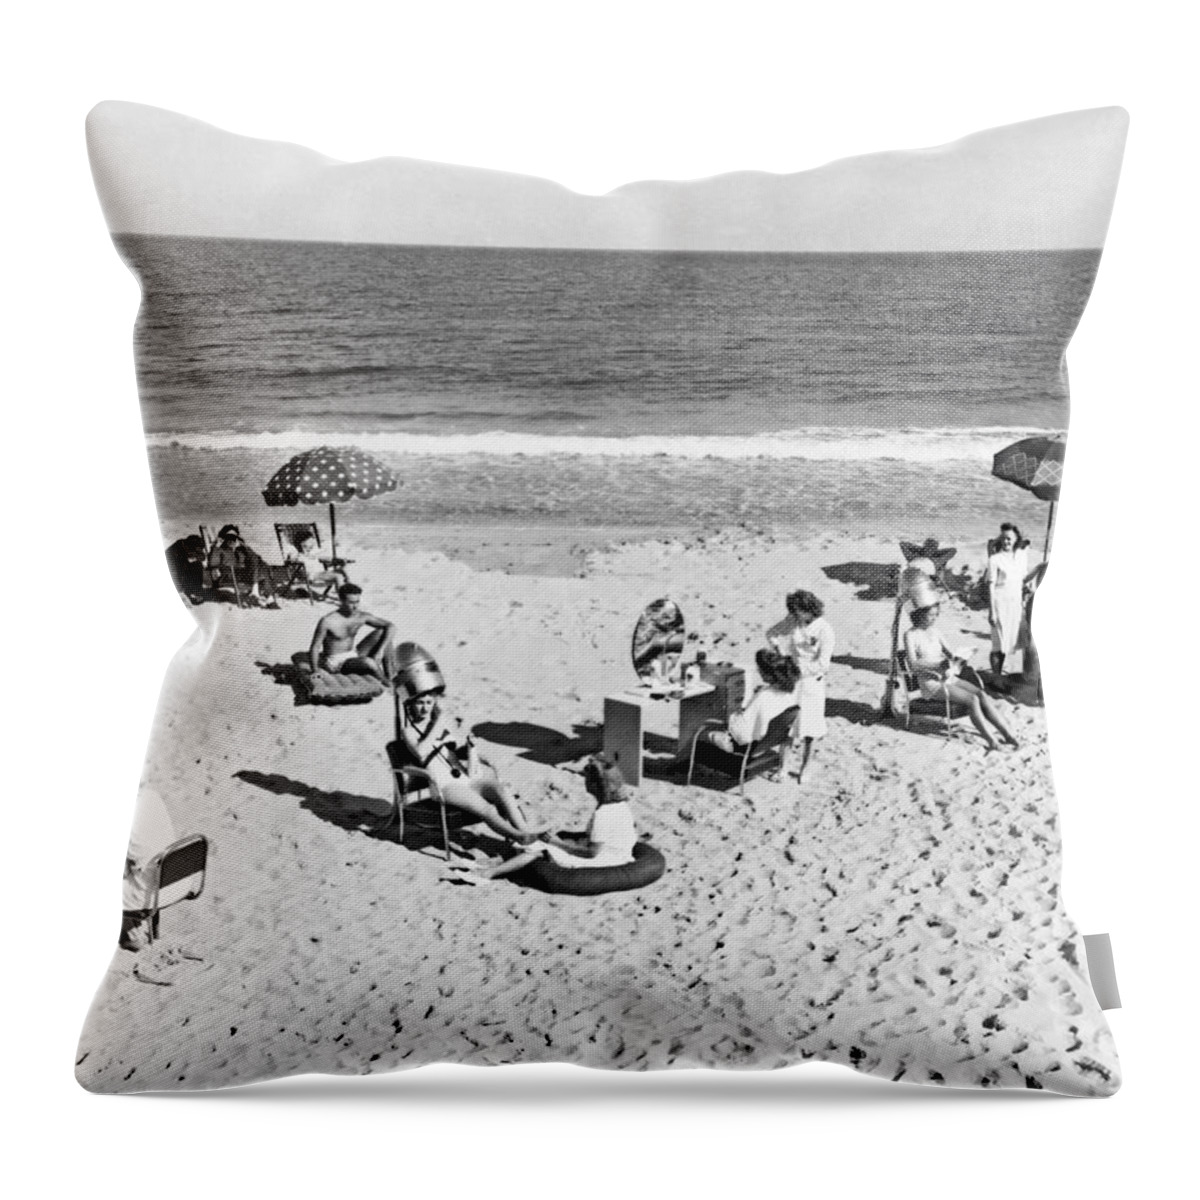 1930s Throw Pillow featuring the photograph Hair Salon On The Beach by Underwood Archives